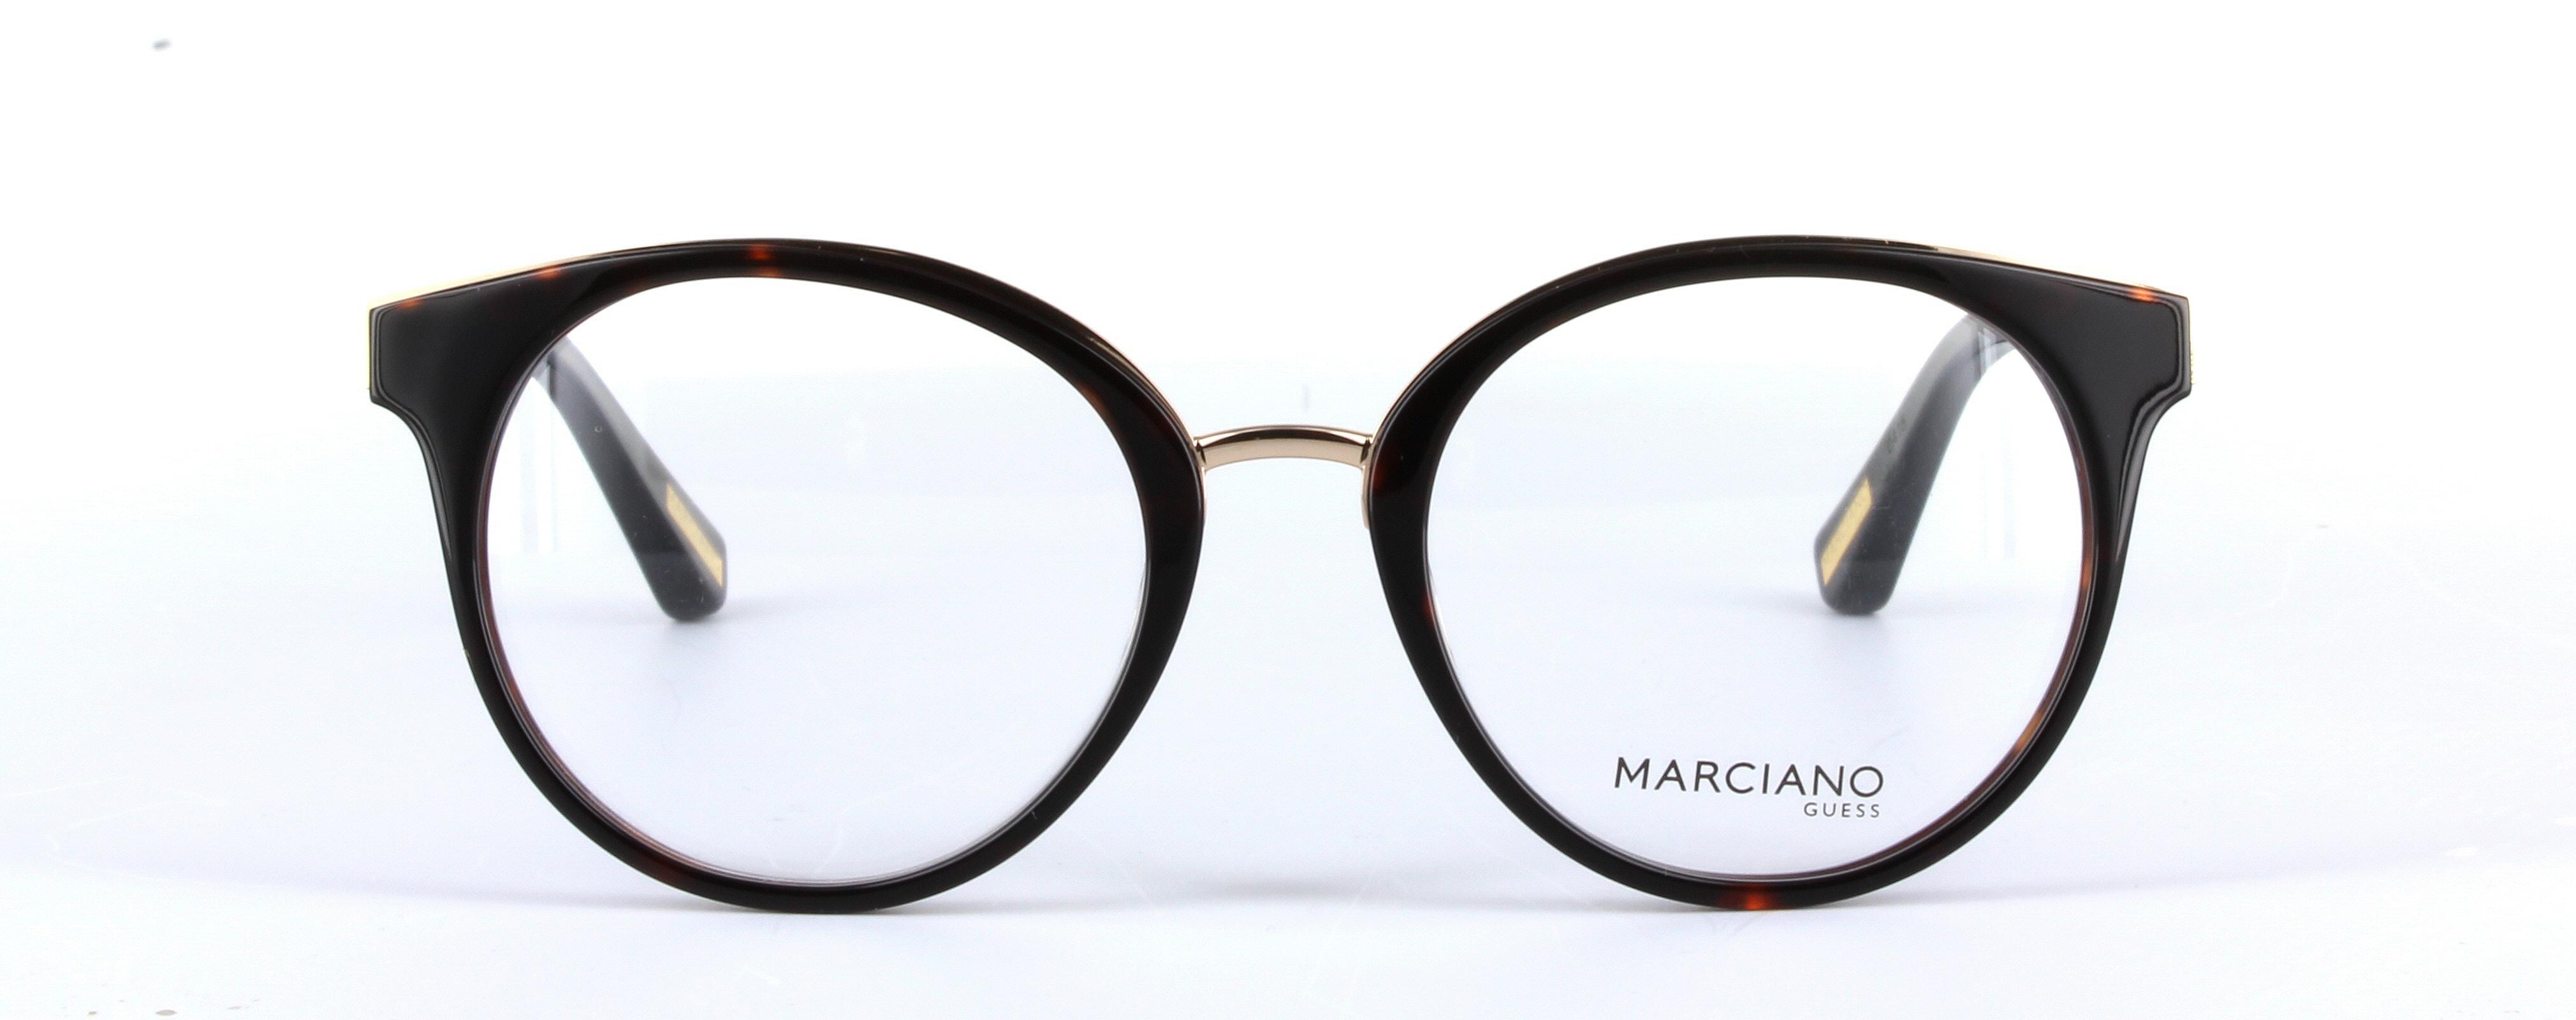 GUESS MARCIANO (GM0303-052) Tortoise Full Rim Oval Acetate Glasses - Image View 5